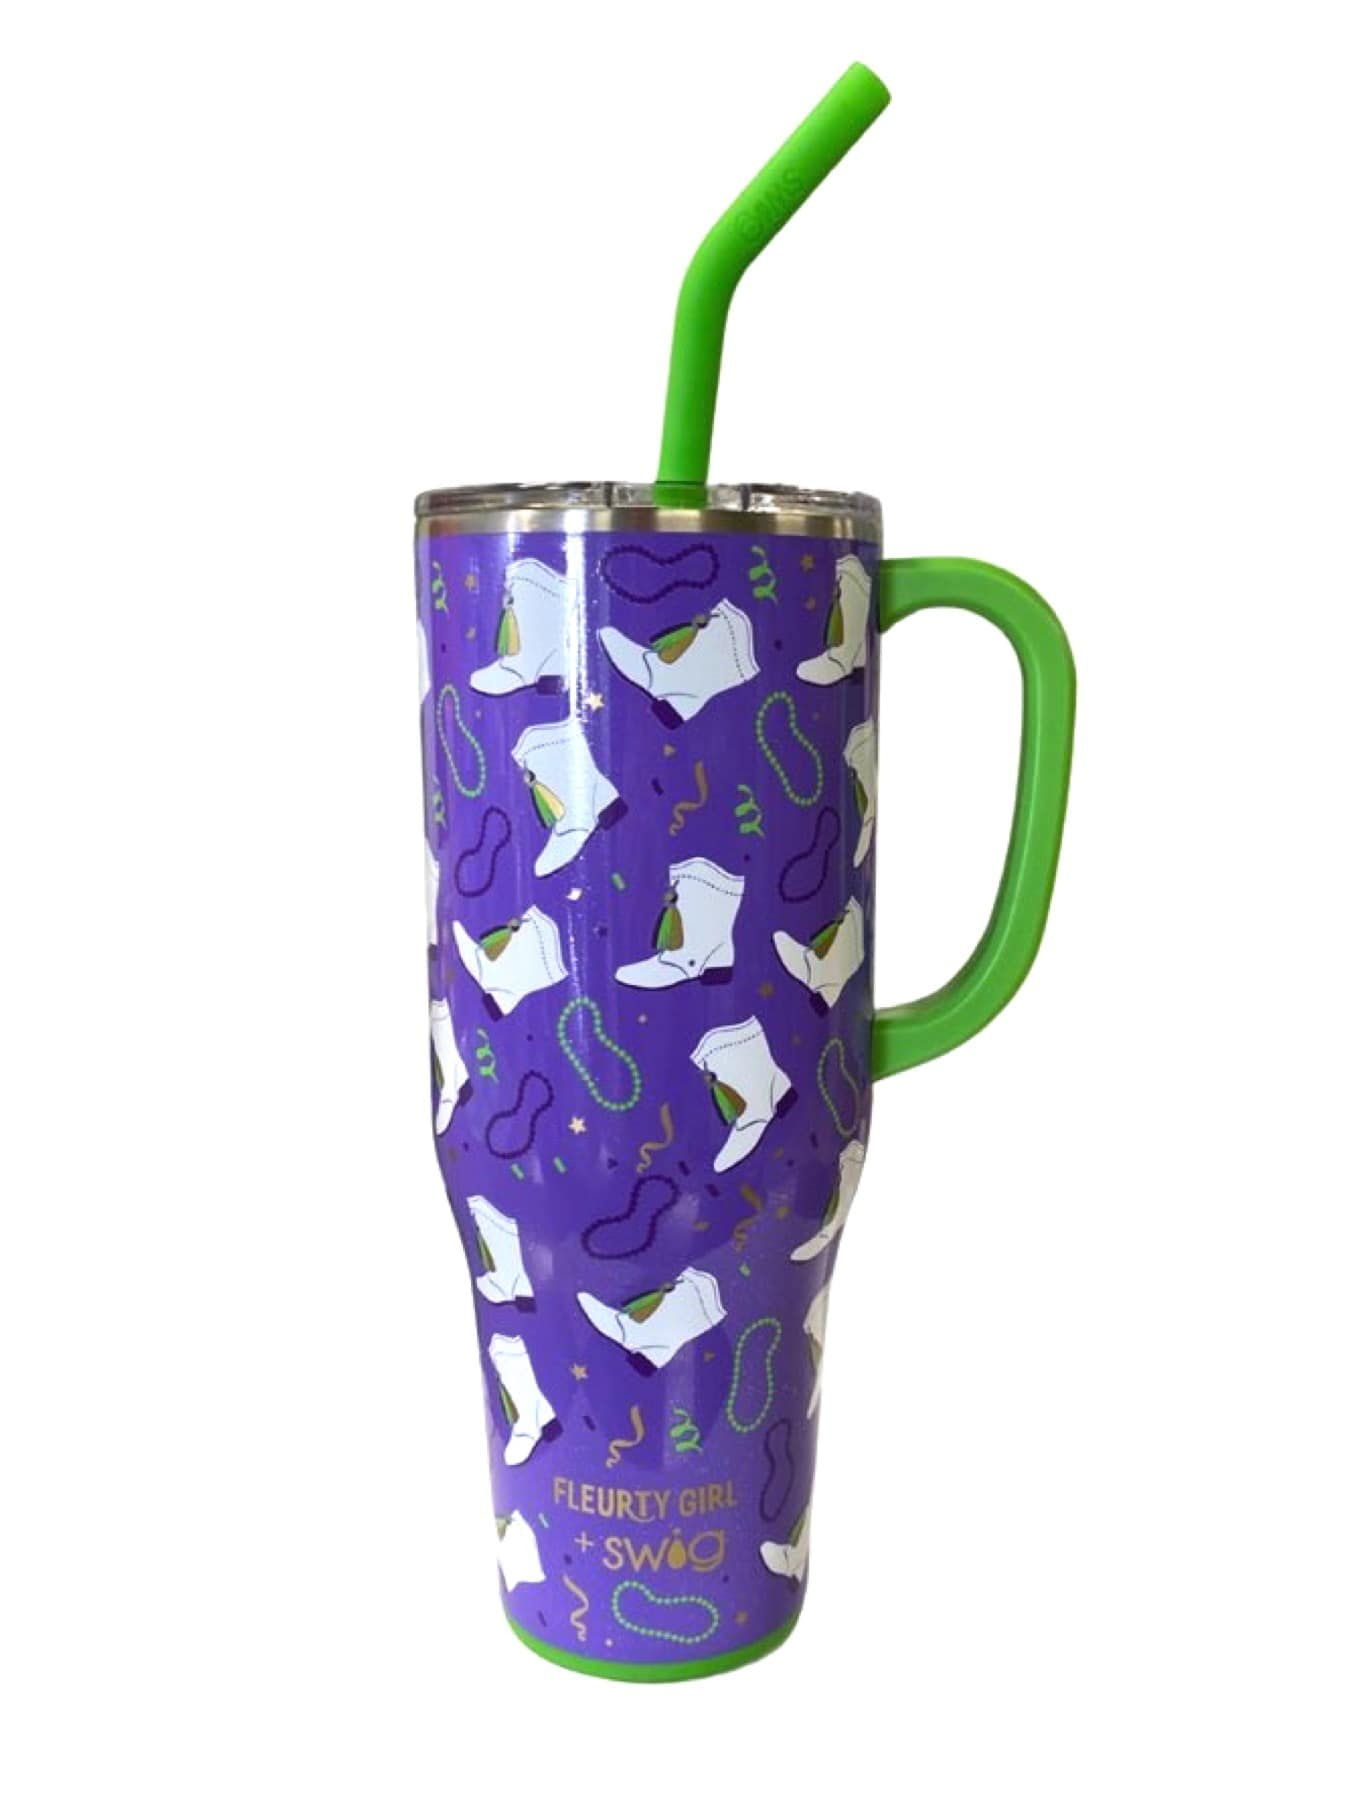 Tumbler with Straw, Mosaic Floral - Steel Mill Gifts